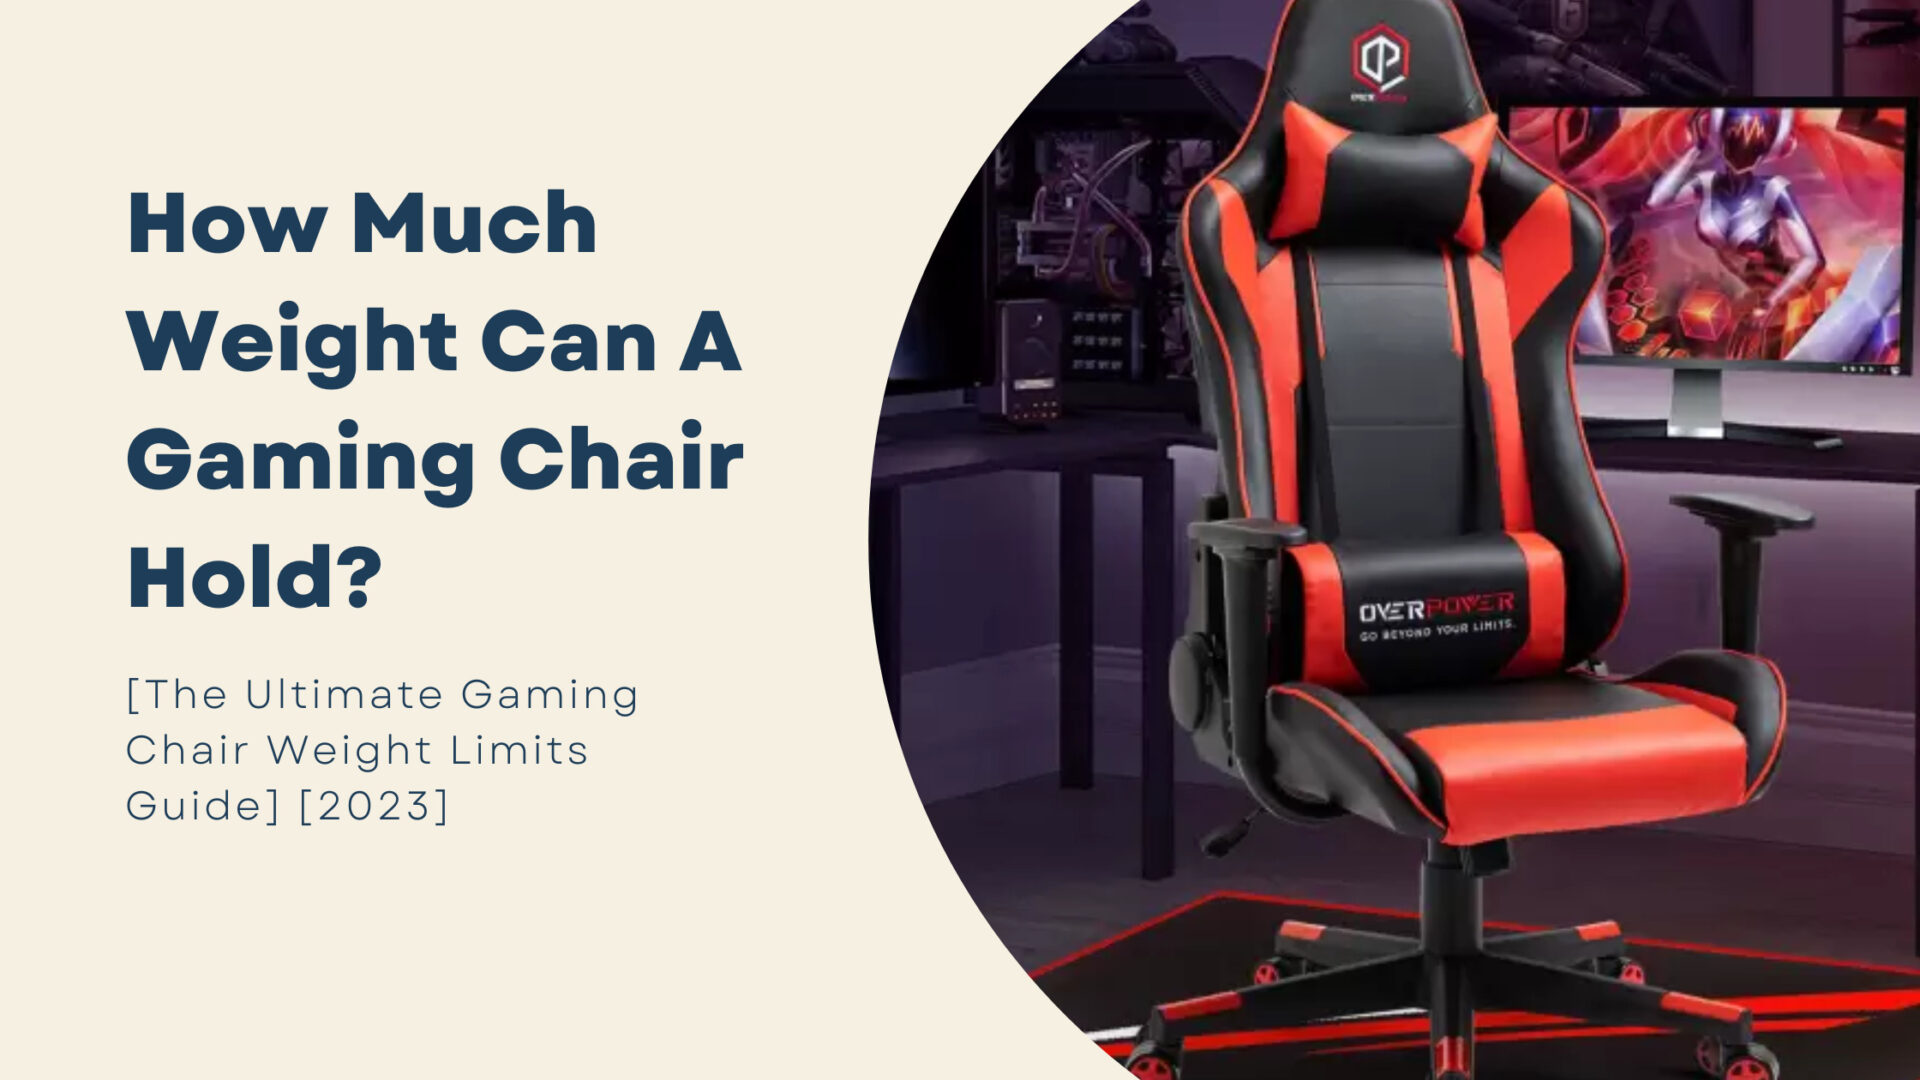 How Much Weight Can A Gaming Chair Hold